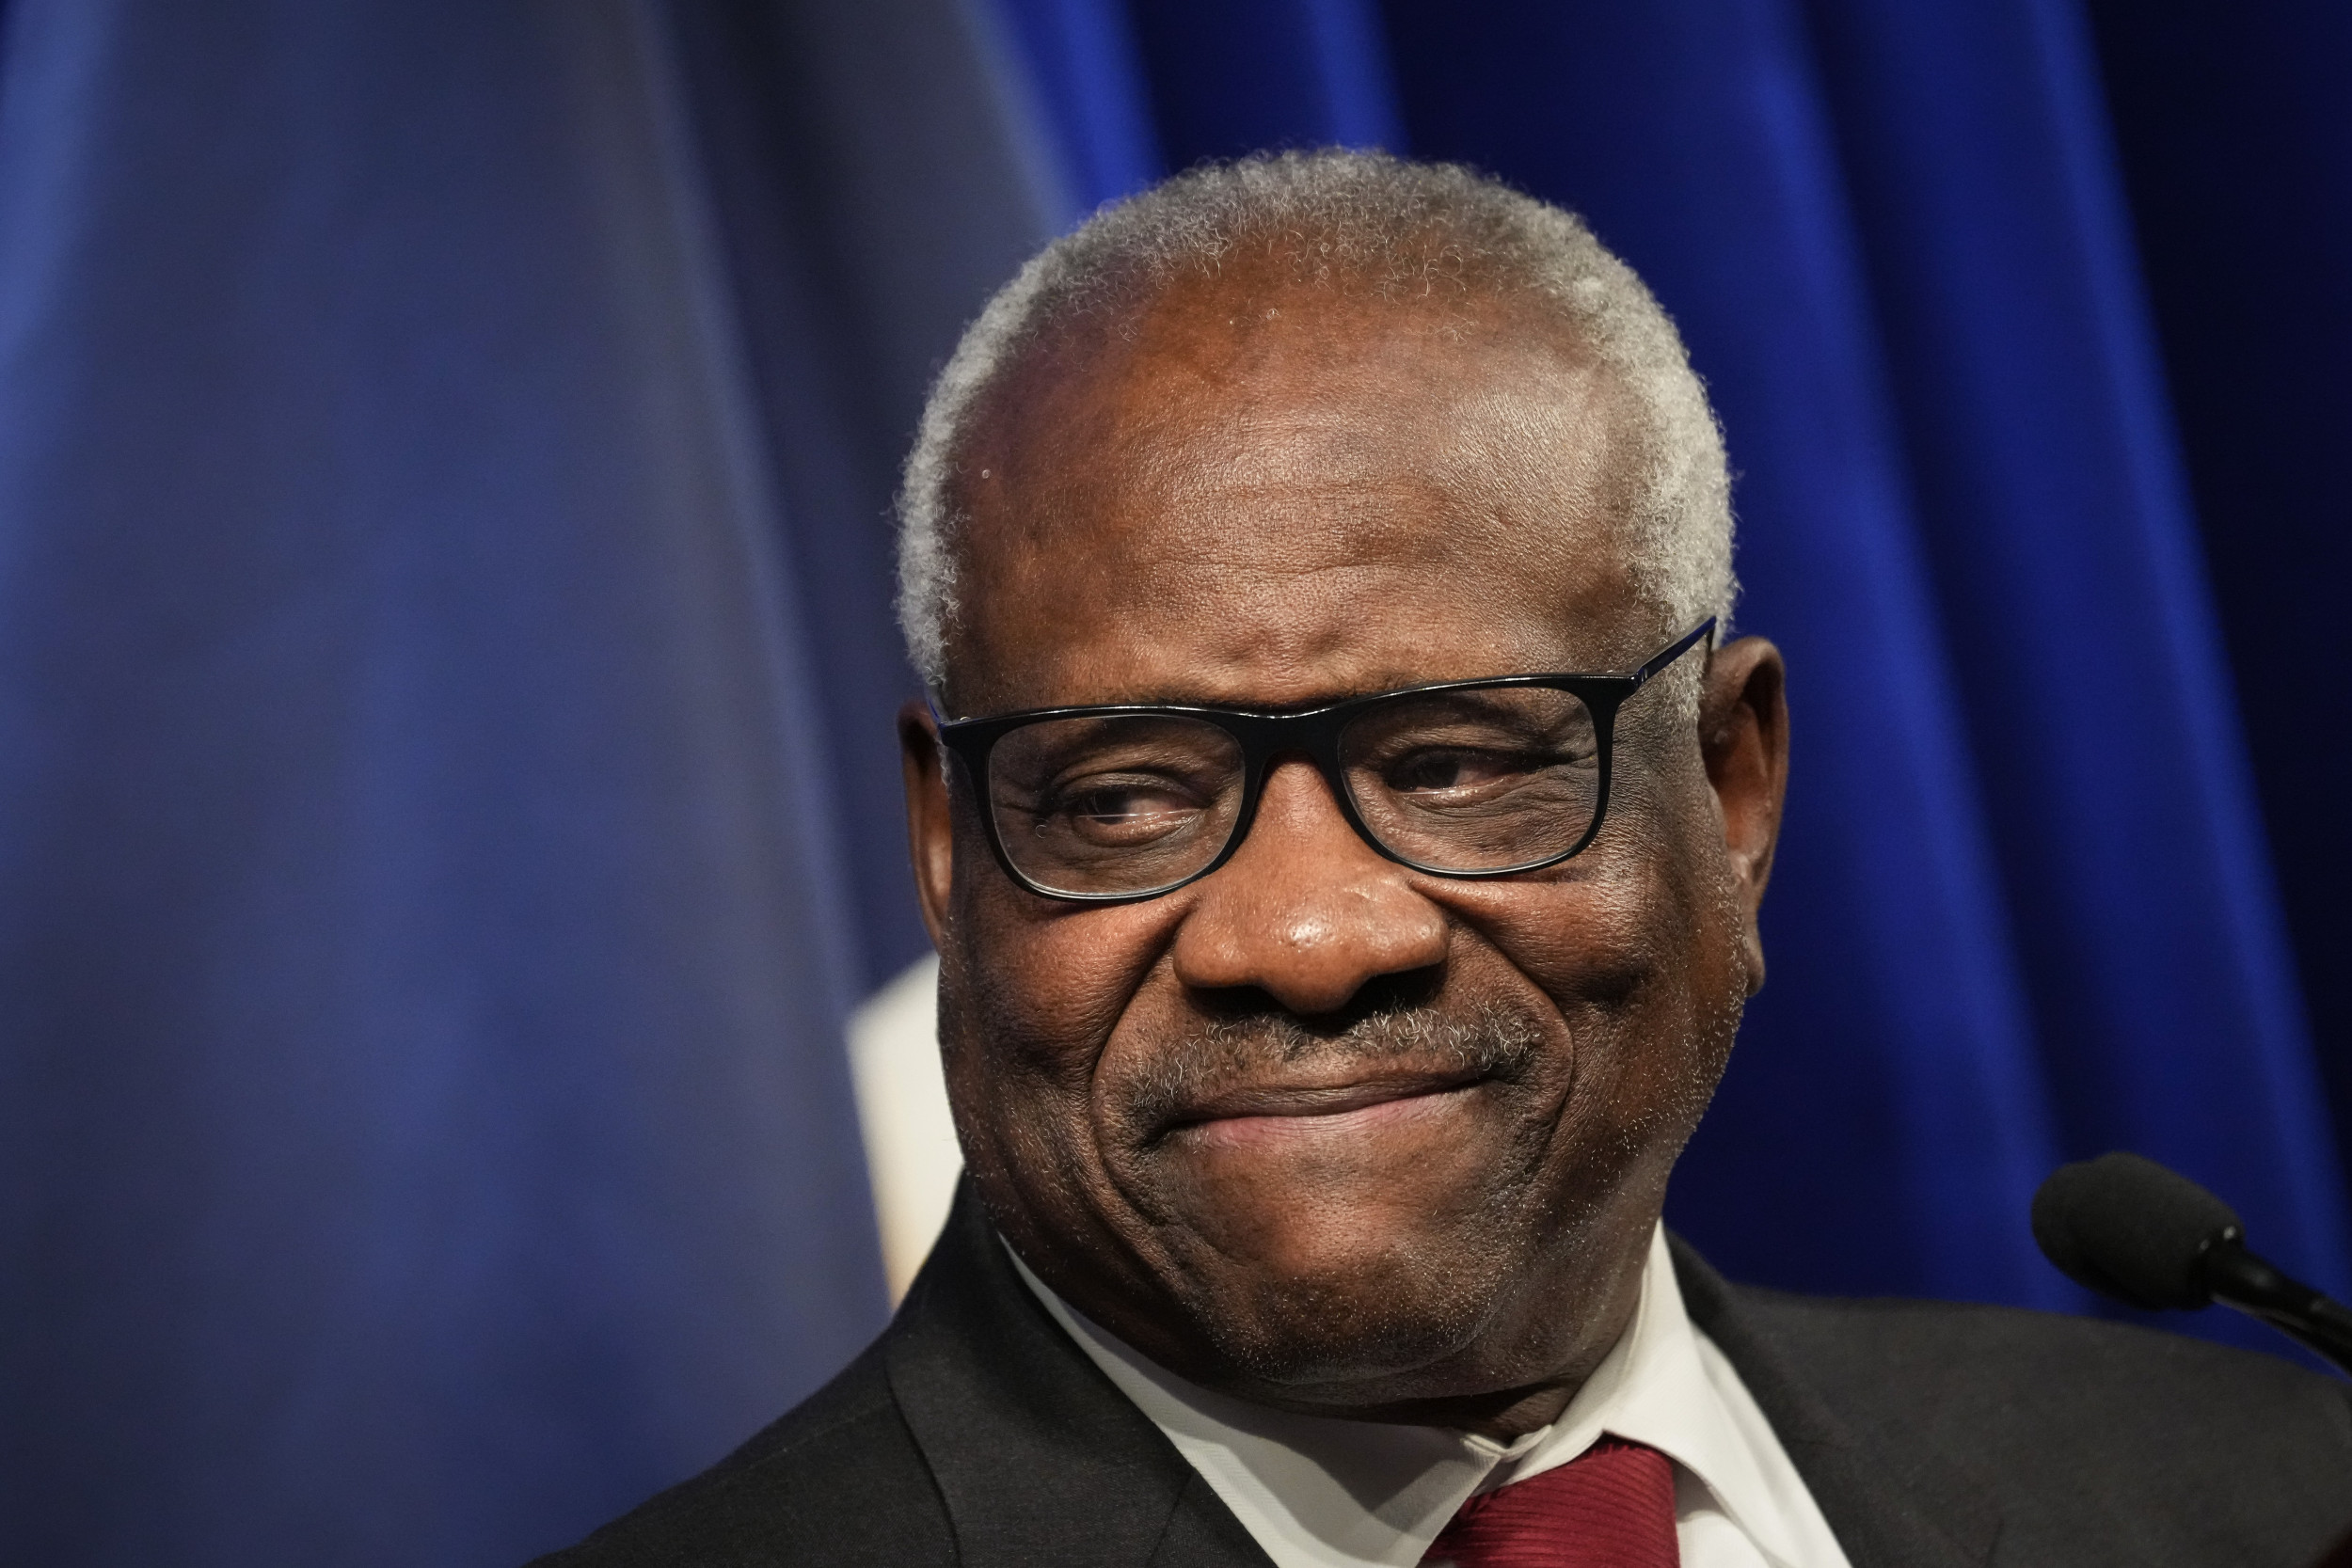 clarence thomas offered $1 million a year to resign